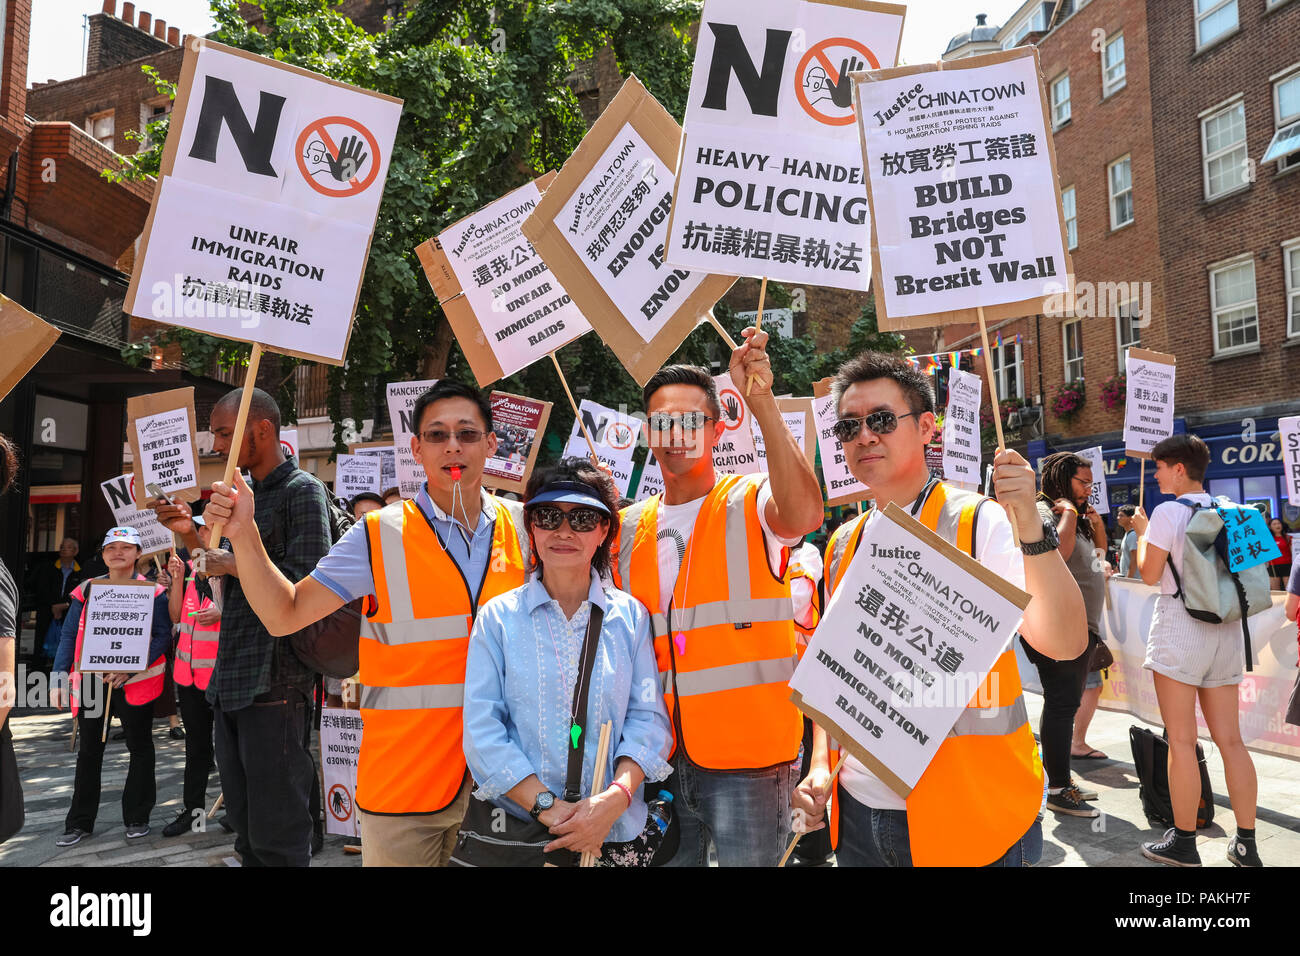 London, UK, 24th July 2018. Protesters comgregate in Chinatown. Businesses  in London's Chinatown stage a five-hour shut down protest against recent  immigration raids, and march from Chinatown to the Home Office in